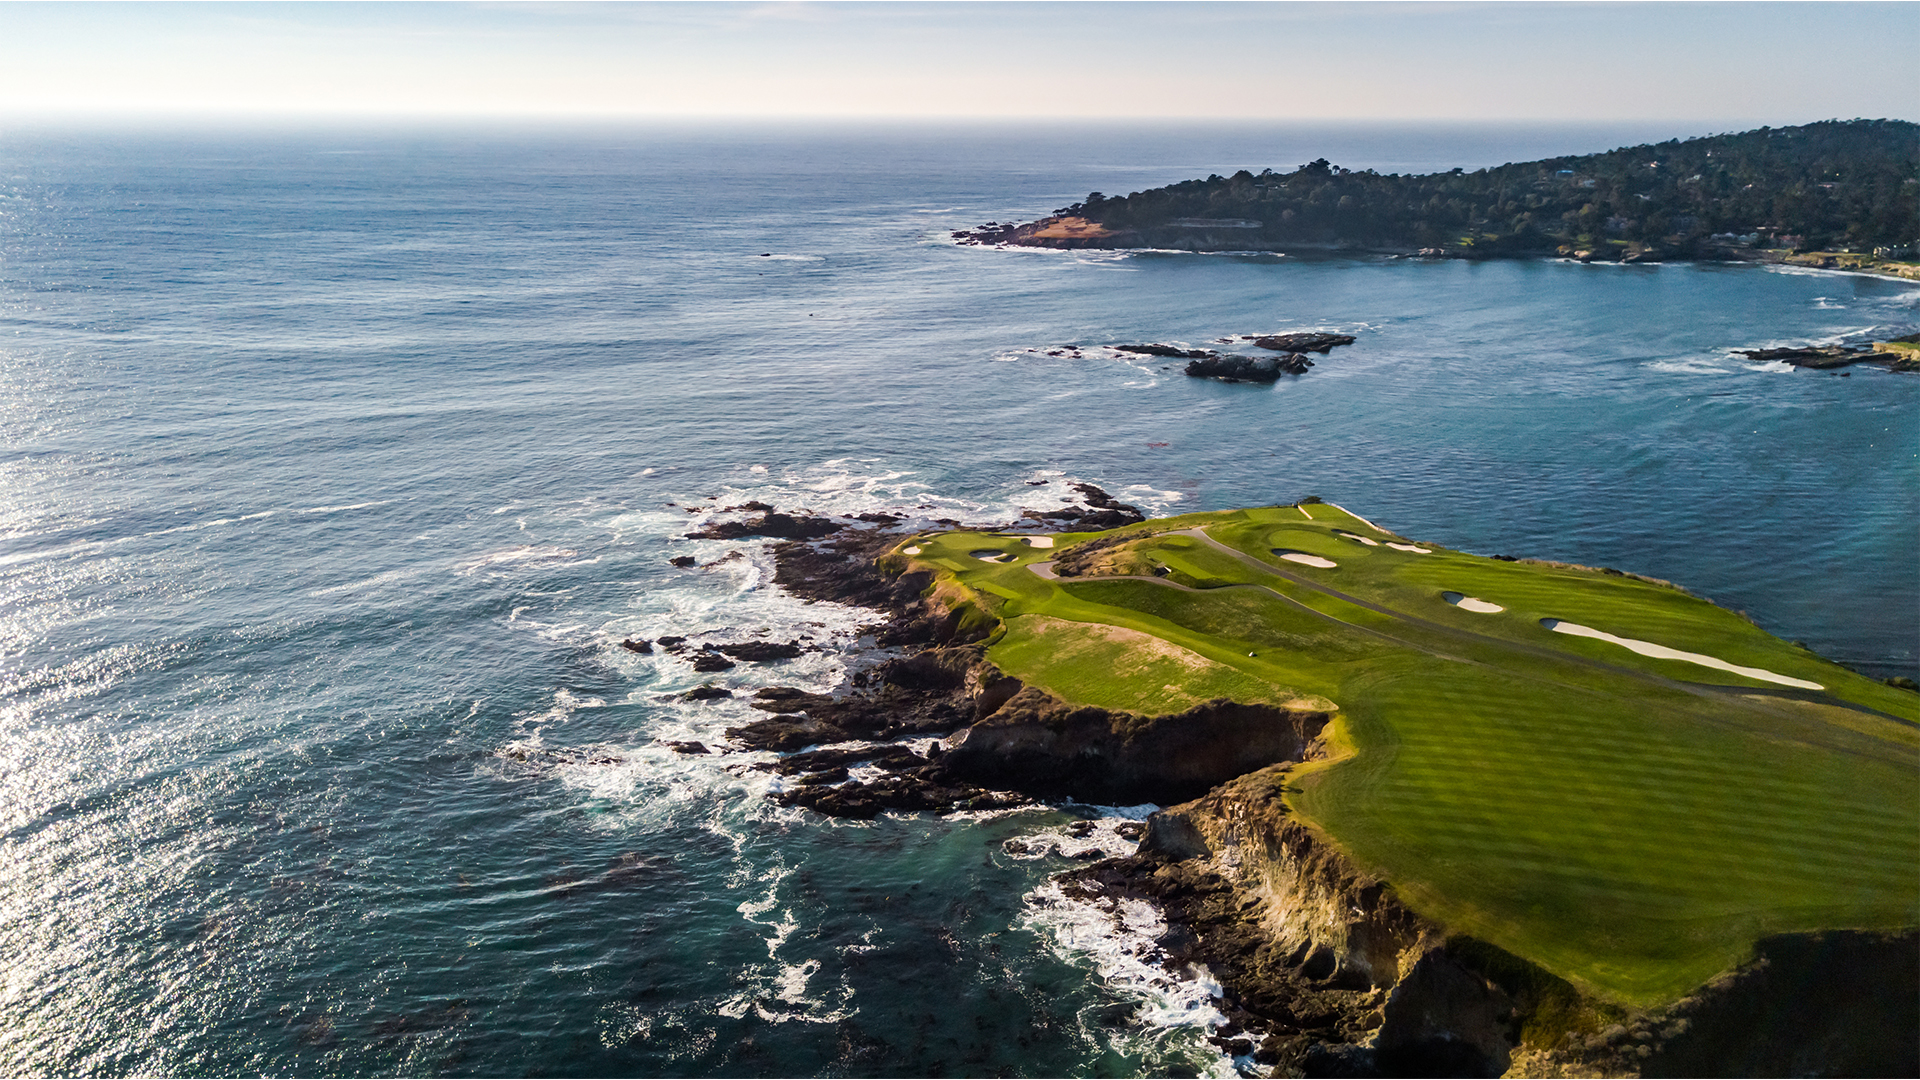 Accuracy is key at Pebble Beach